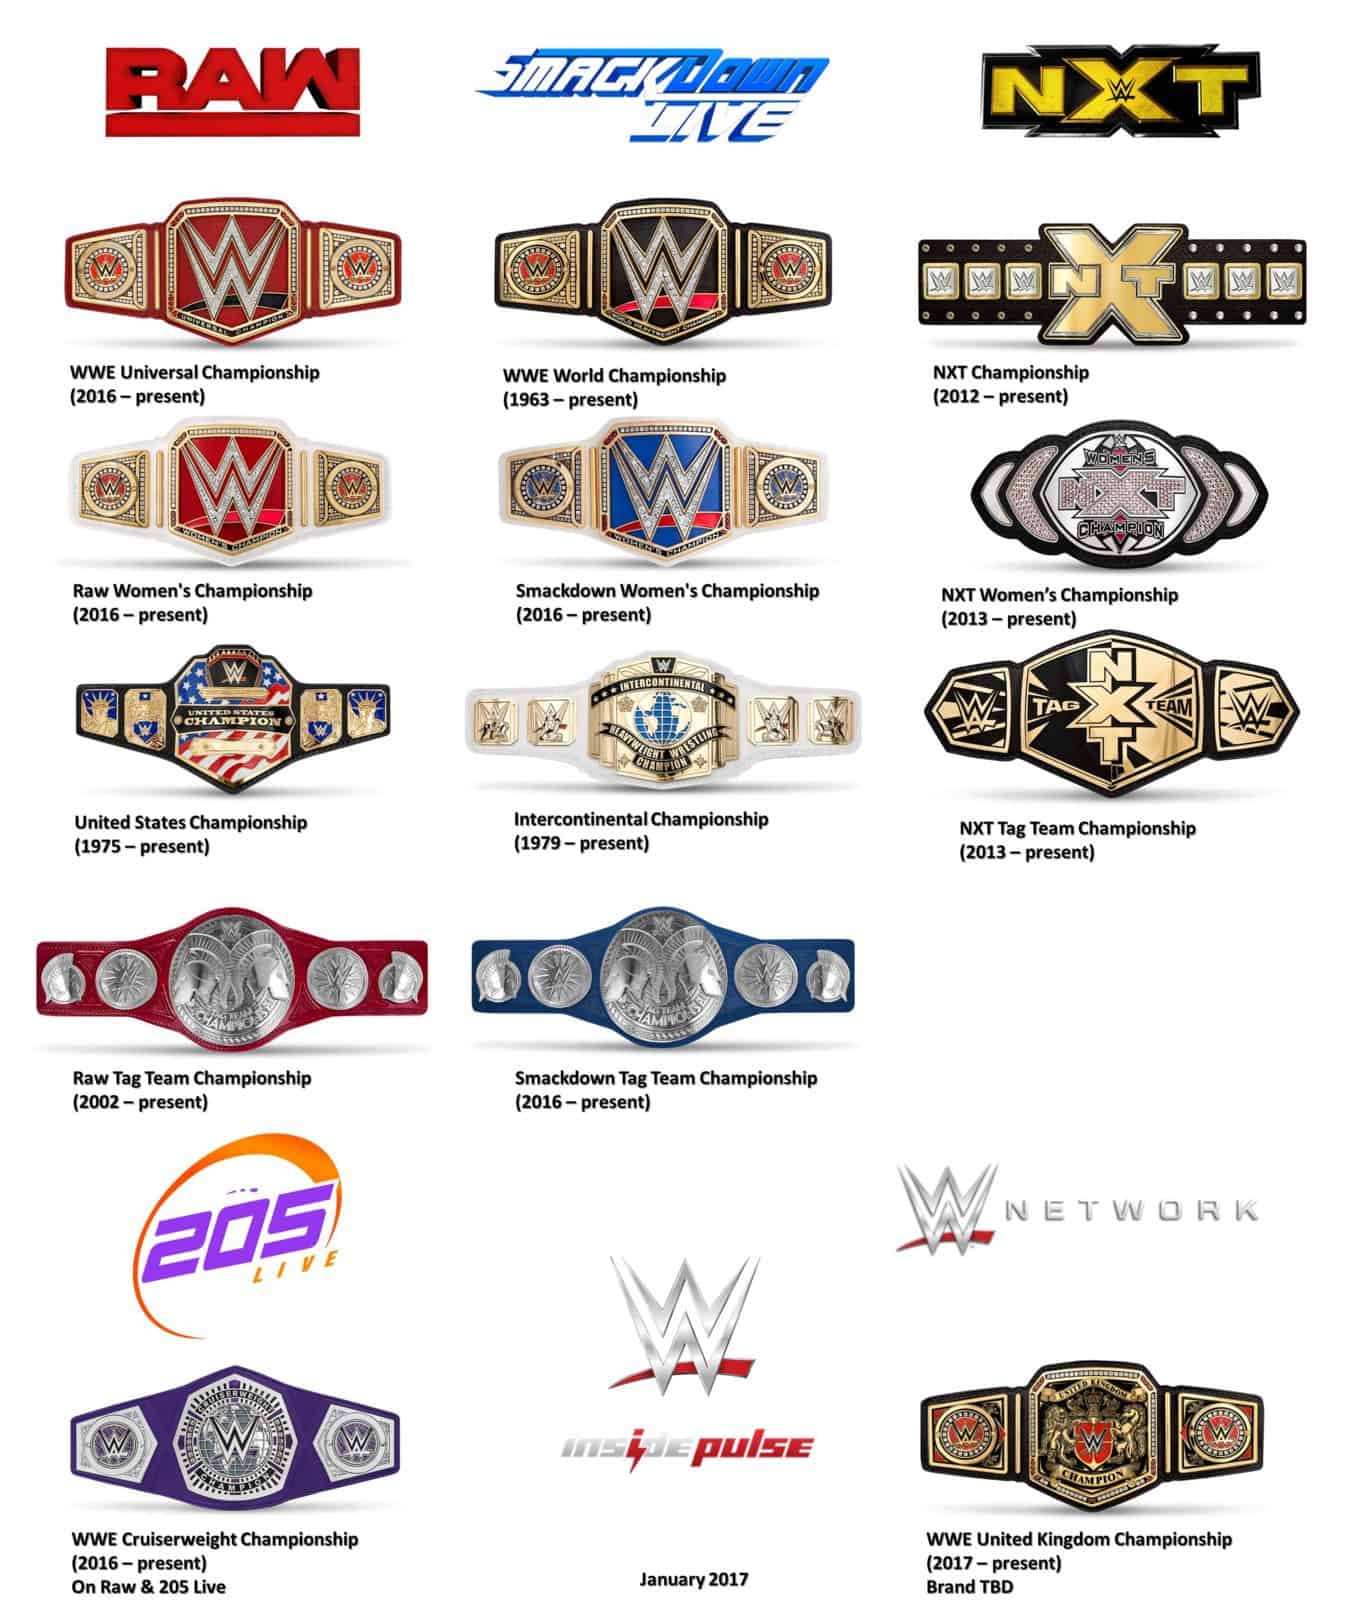 WWE Raw, Smackdown Live, 205 Live & NXT Spoilers & News: All 13 Championship Belts Due To New WWE United Kingdom Championship Belt | Inside